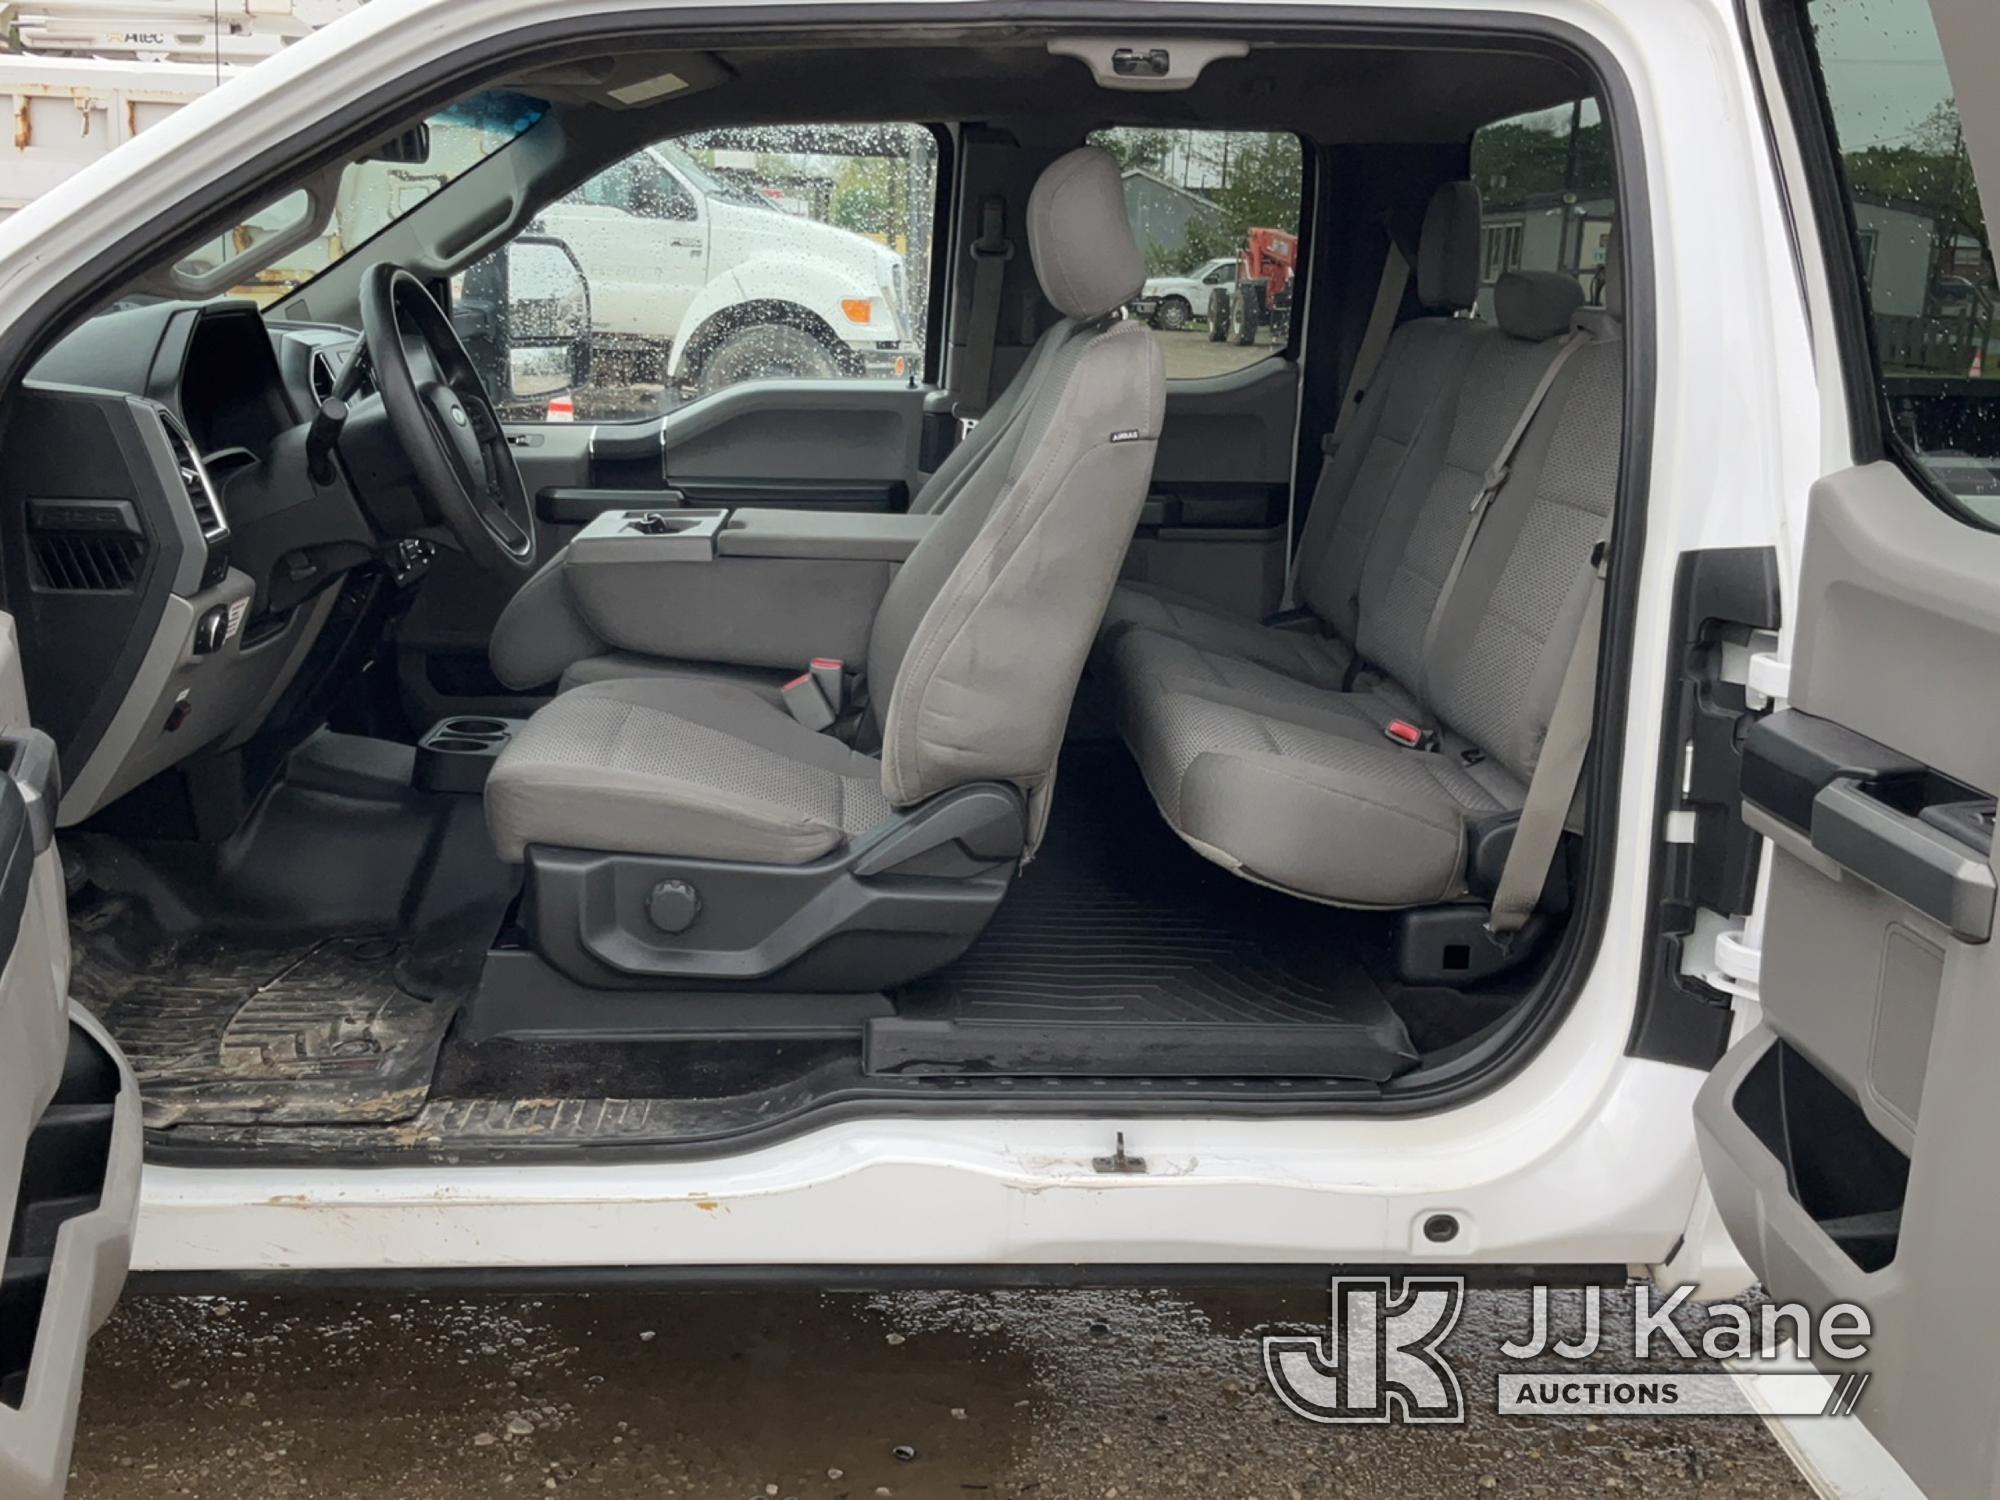 (Charlotte, MI) 2016 Ford F150 4x4 Extended-Cab Pickup Truck Runs, Moves